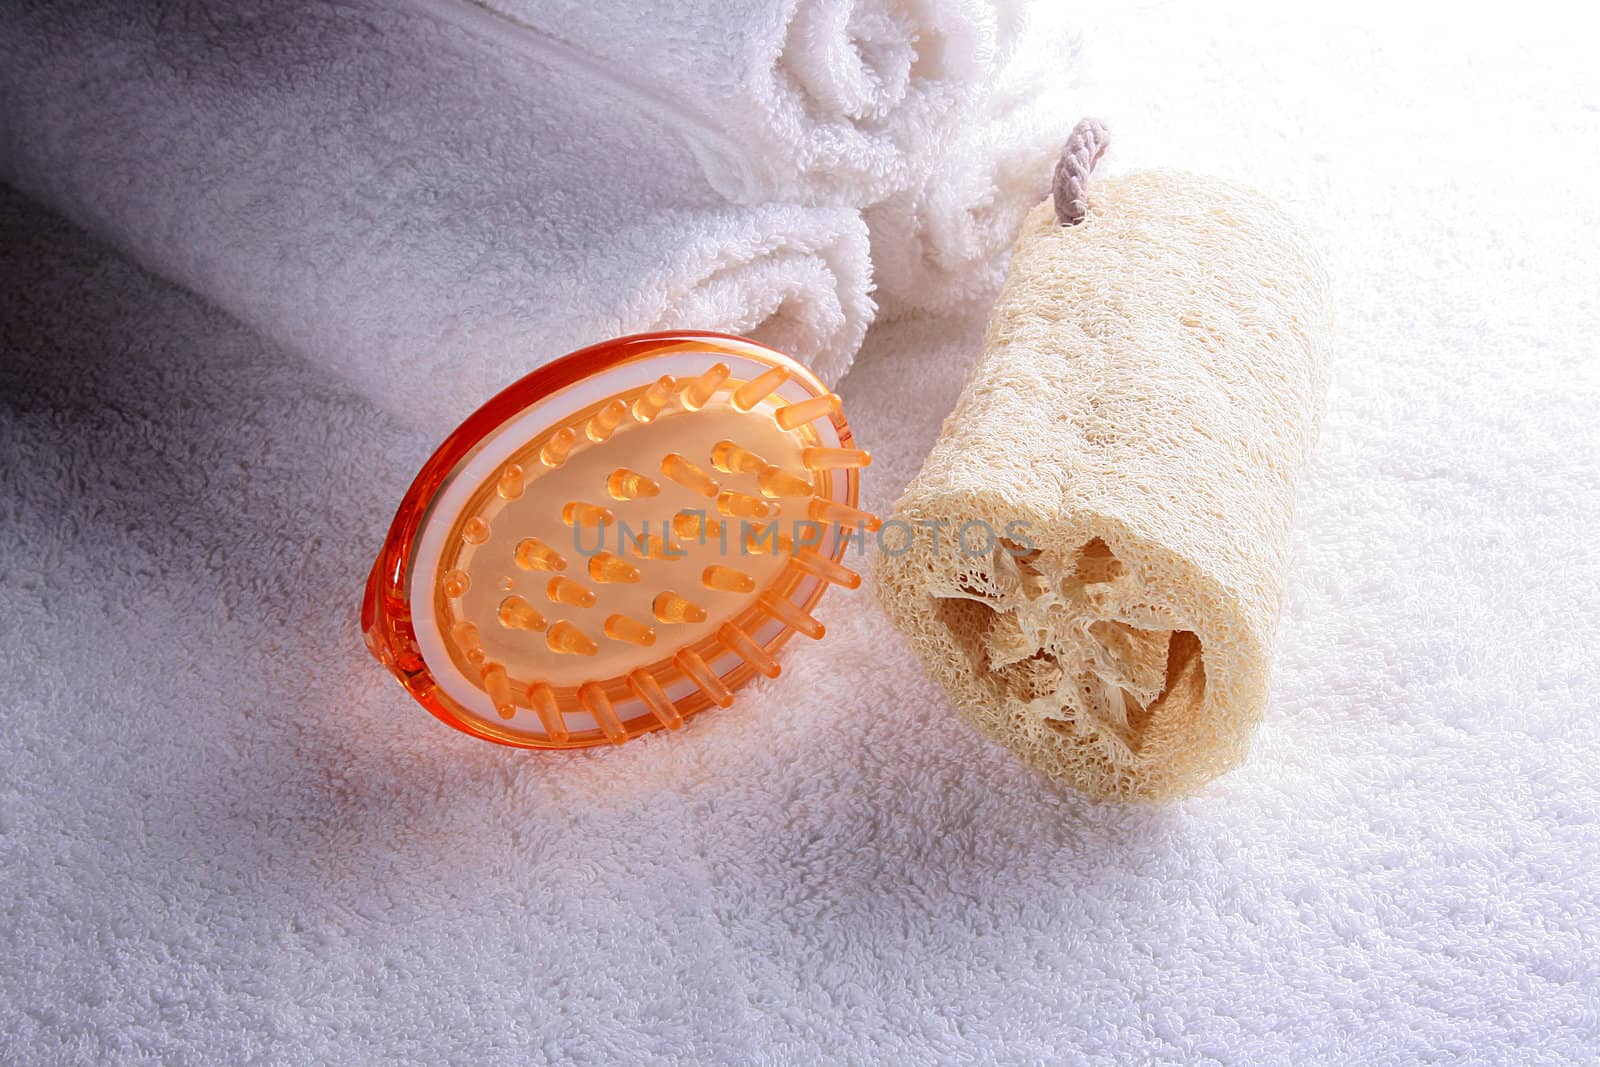 Massage brush and bast with white towels curtailed into a roll on a towel.